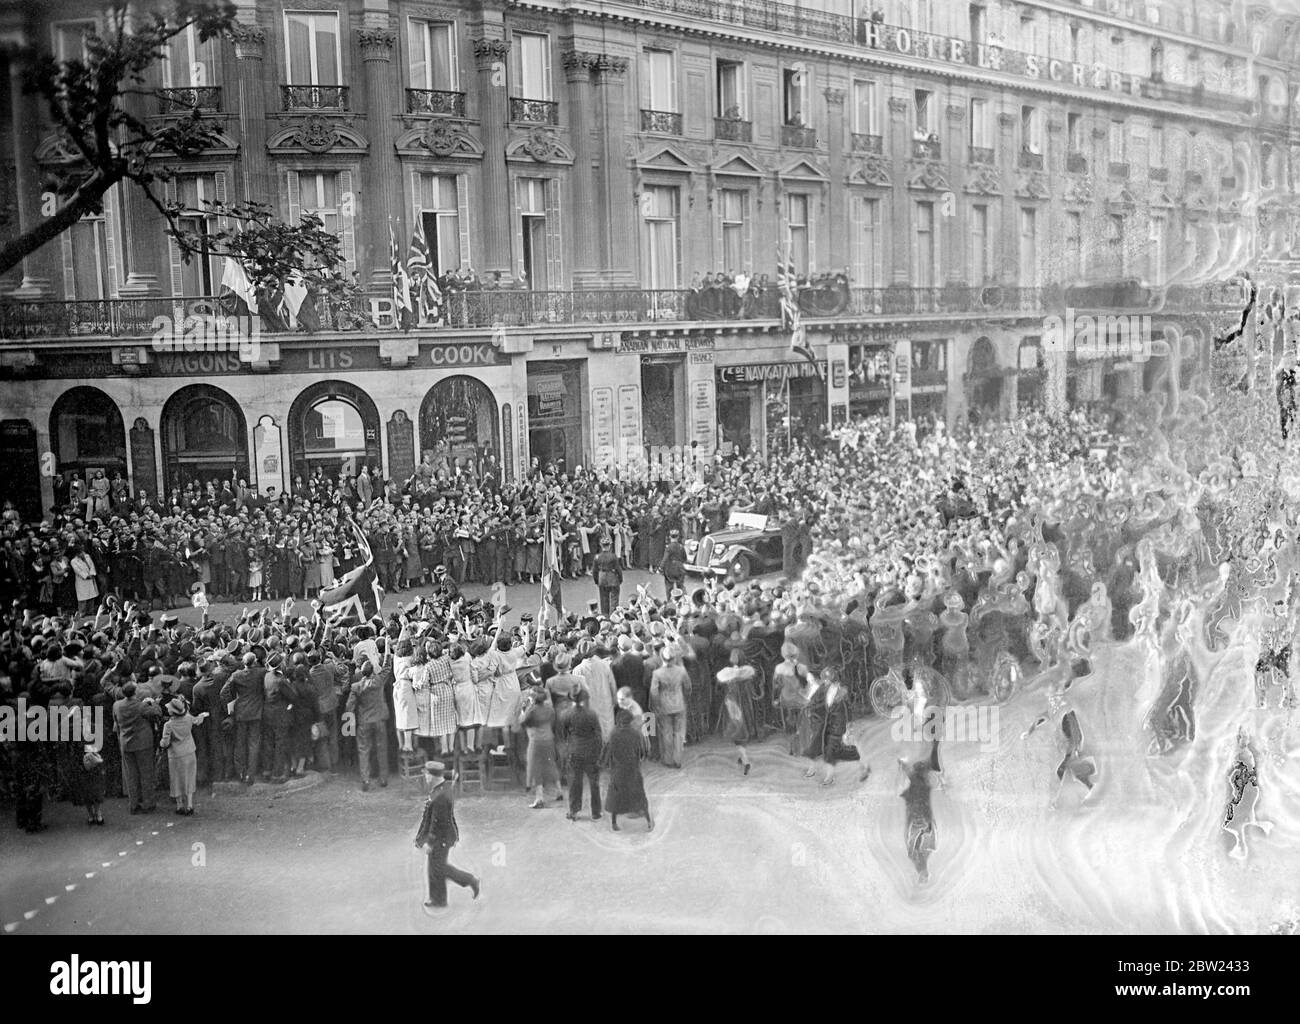 Paris. Cheers French Premier on his return from Munich. One of the most resounding welcomes ever given to a homecoming statesman was received in Paris by Edouard Daladier, the French Premier, when he returned from the successful Four Power 'peace conference' in Munich. Thousands of happy people lined the streets to cheer him. Stock Photo